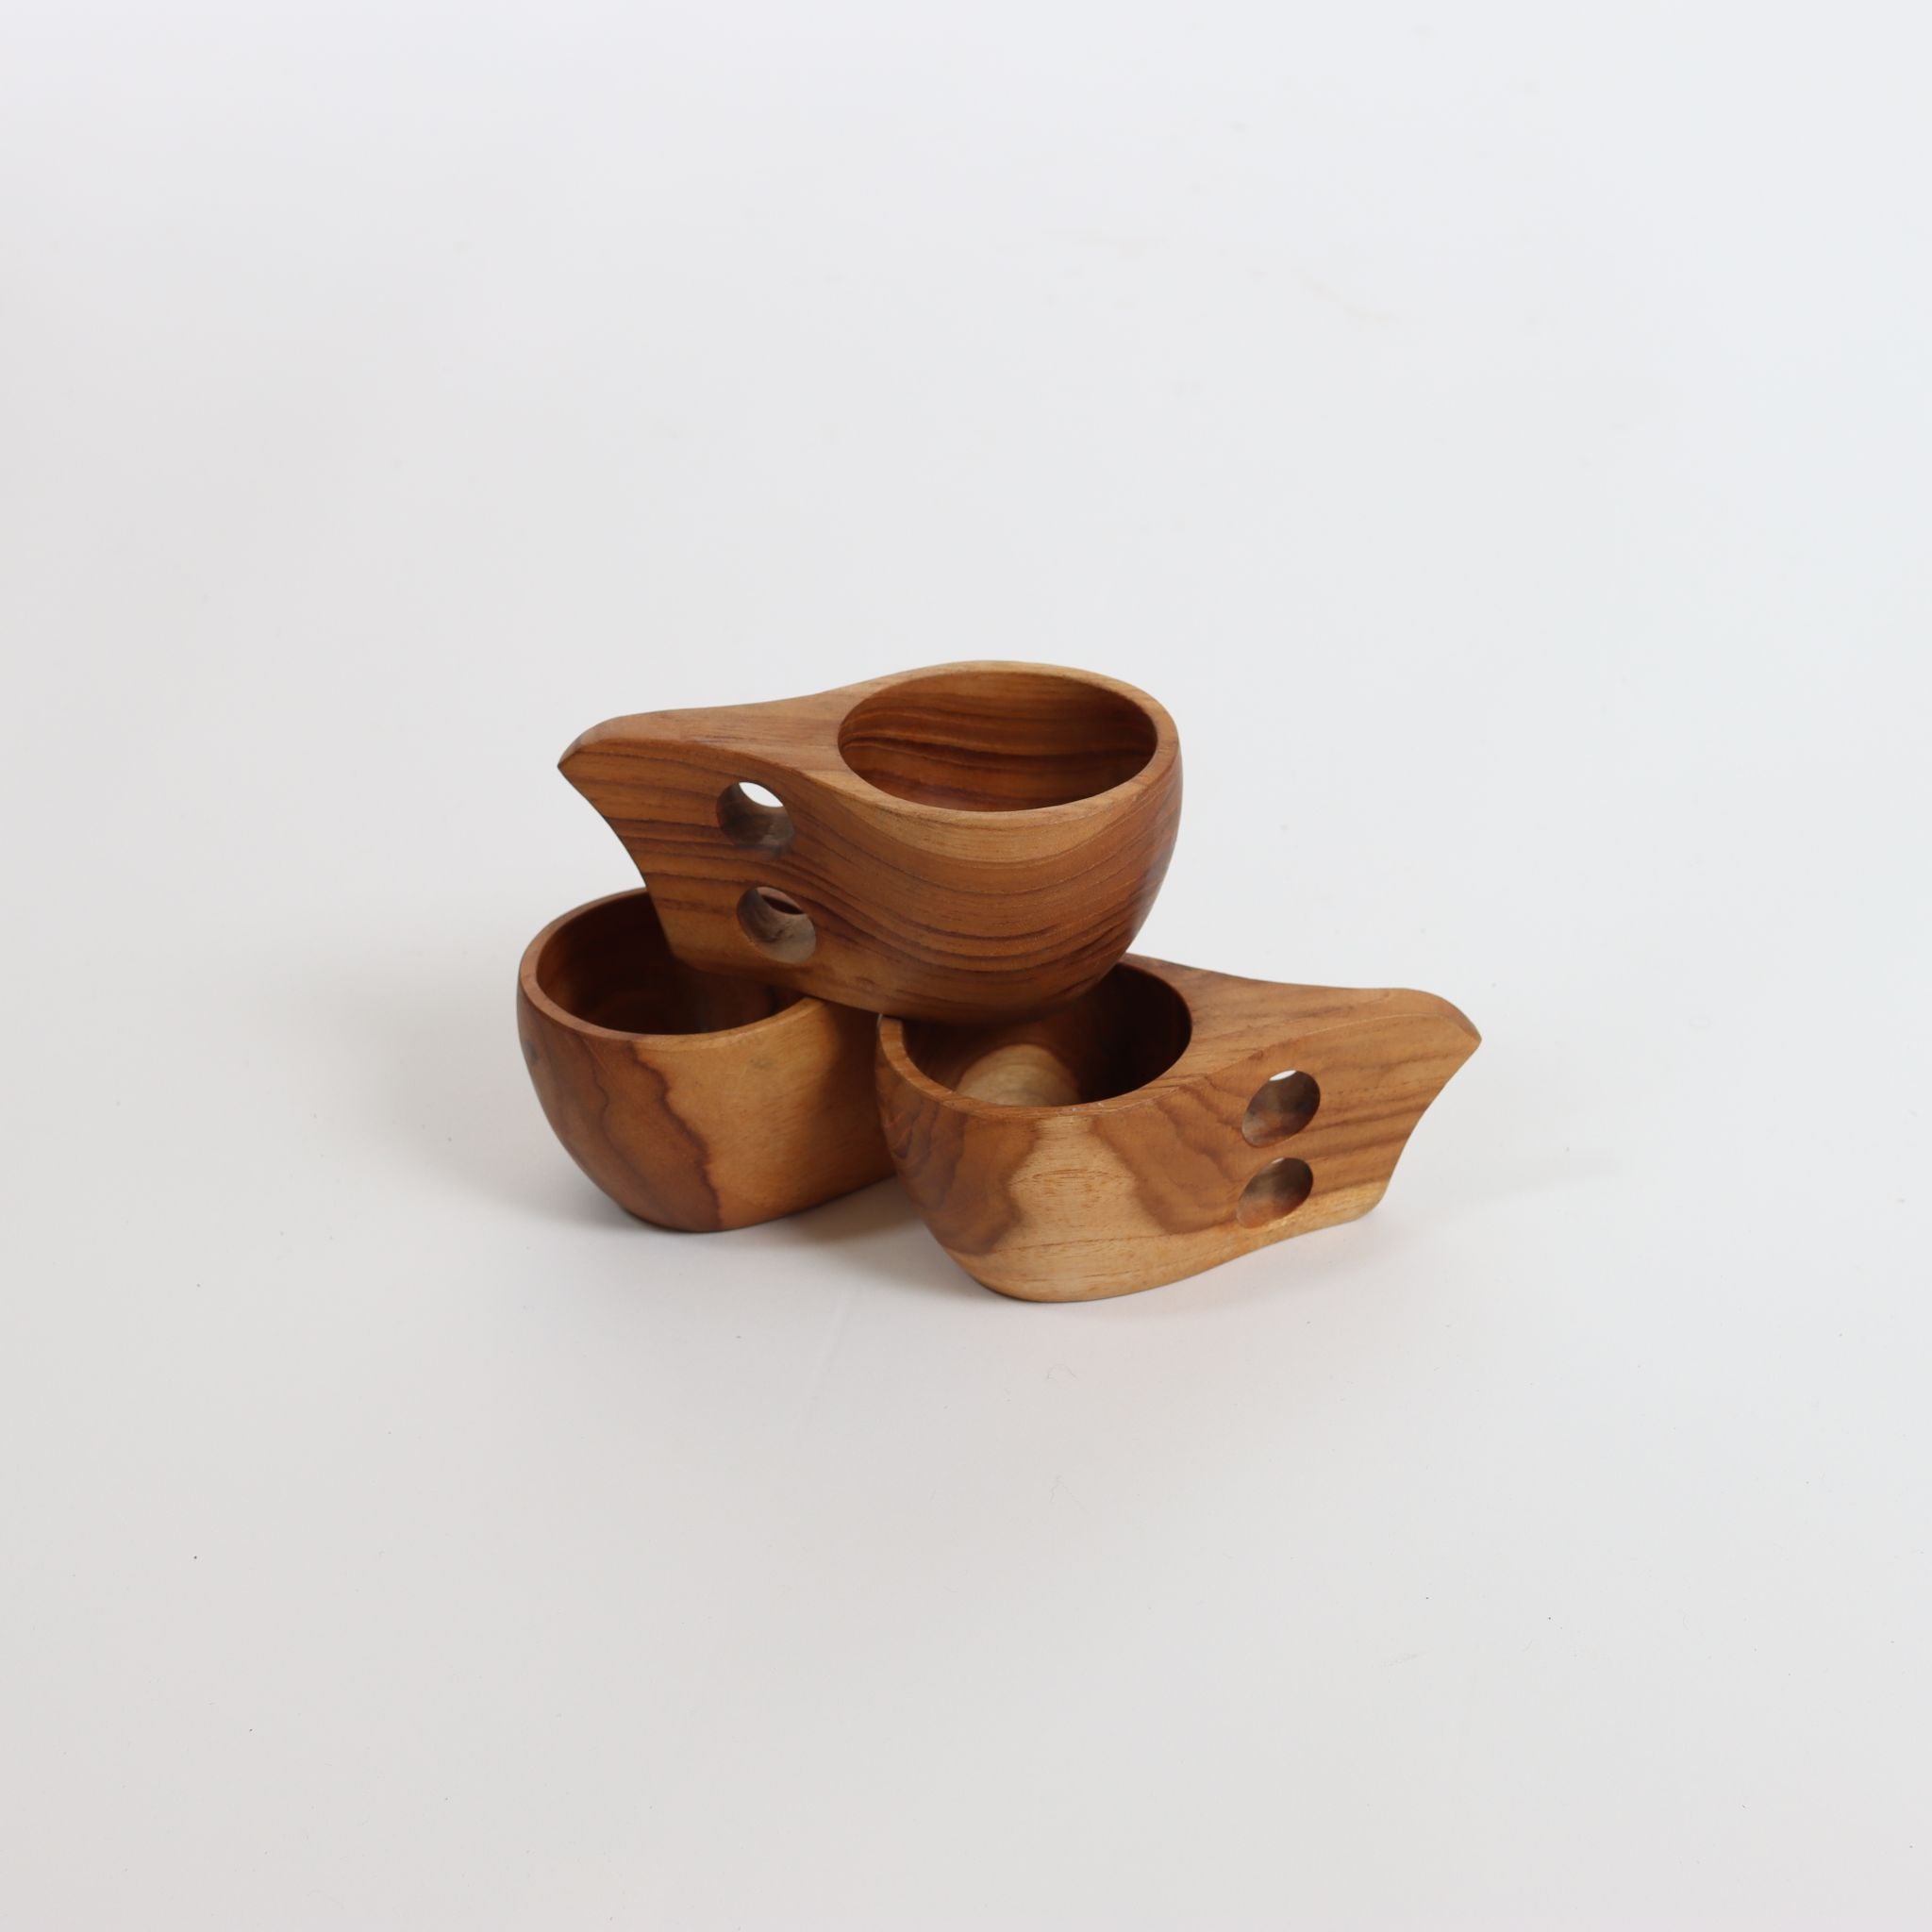 Hand Crafted Teak Cup Art Piece